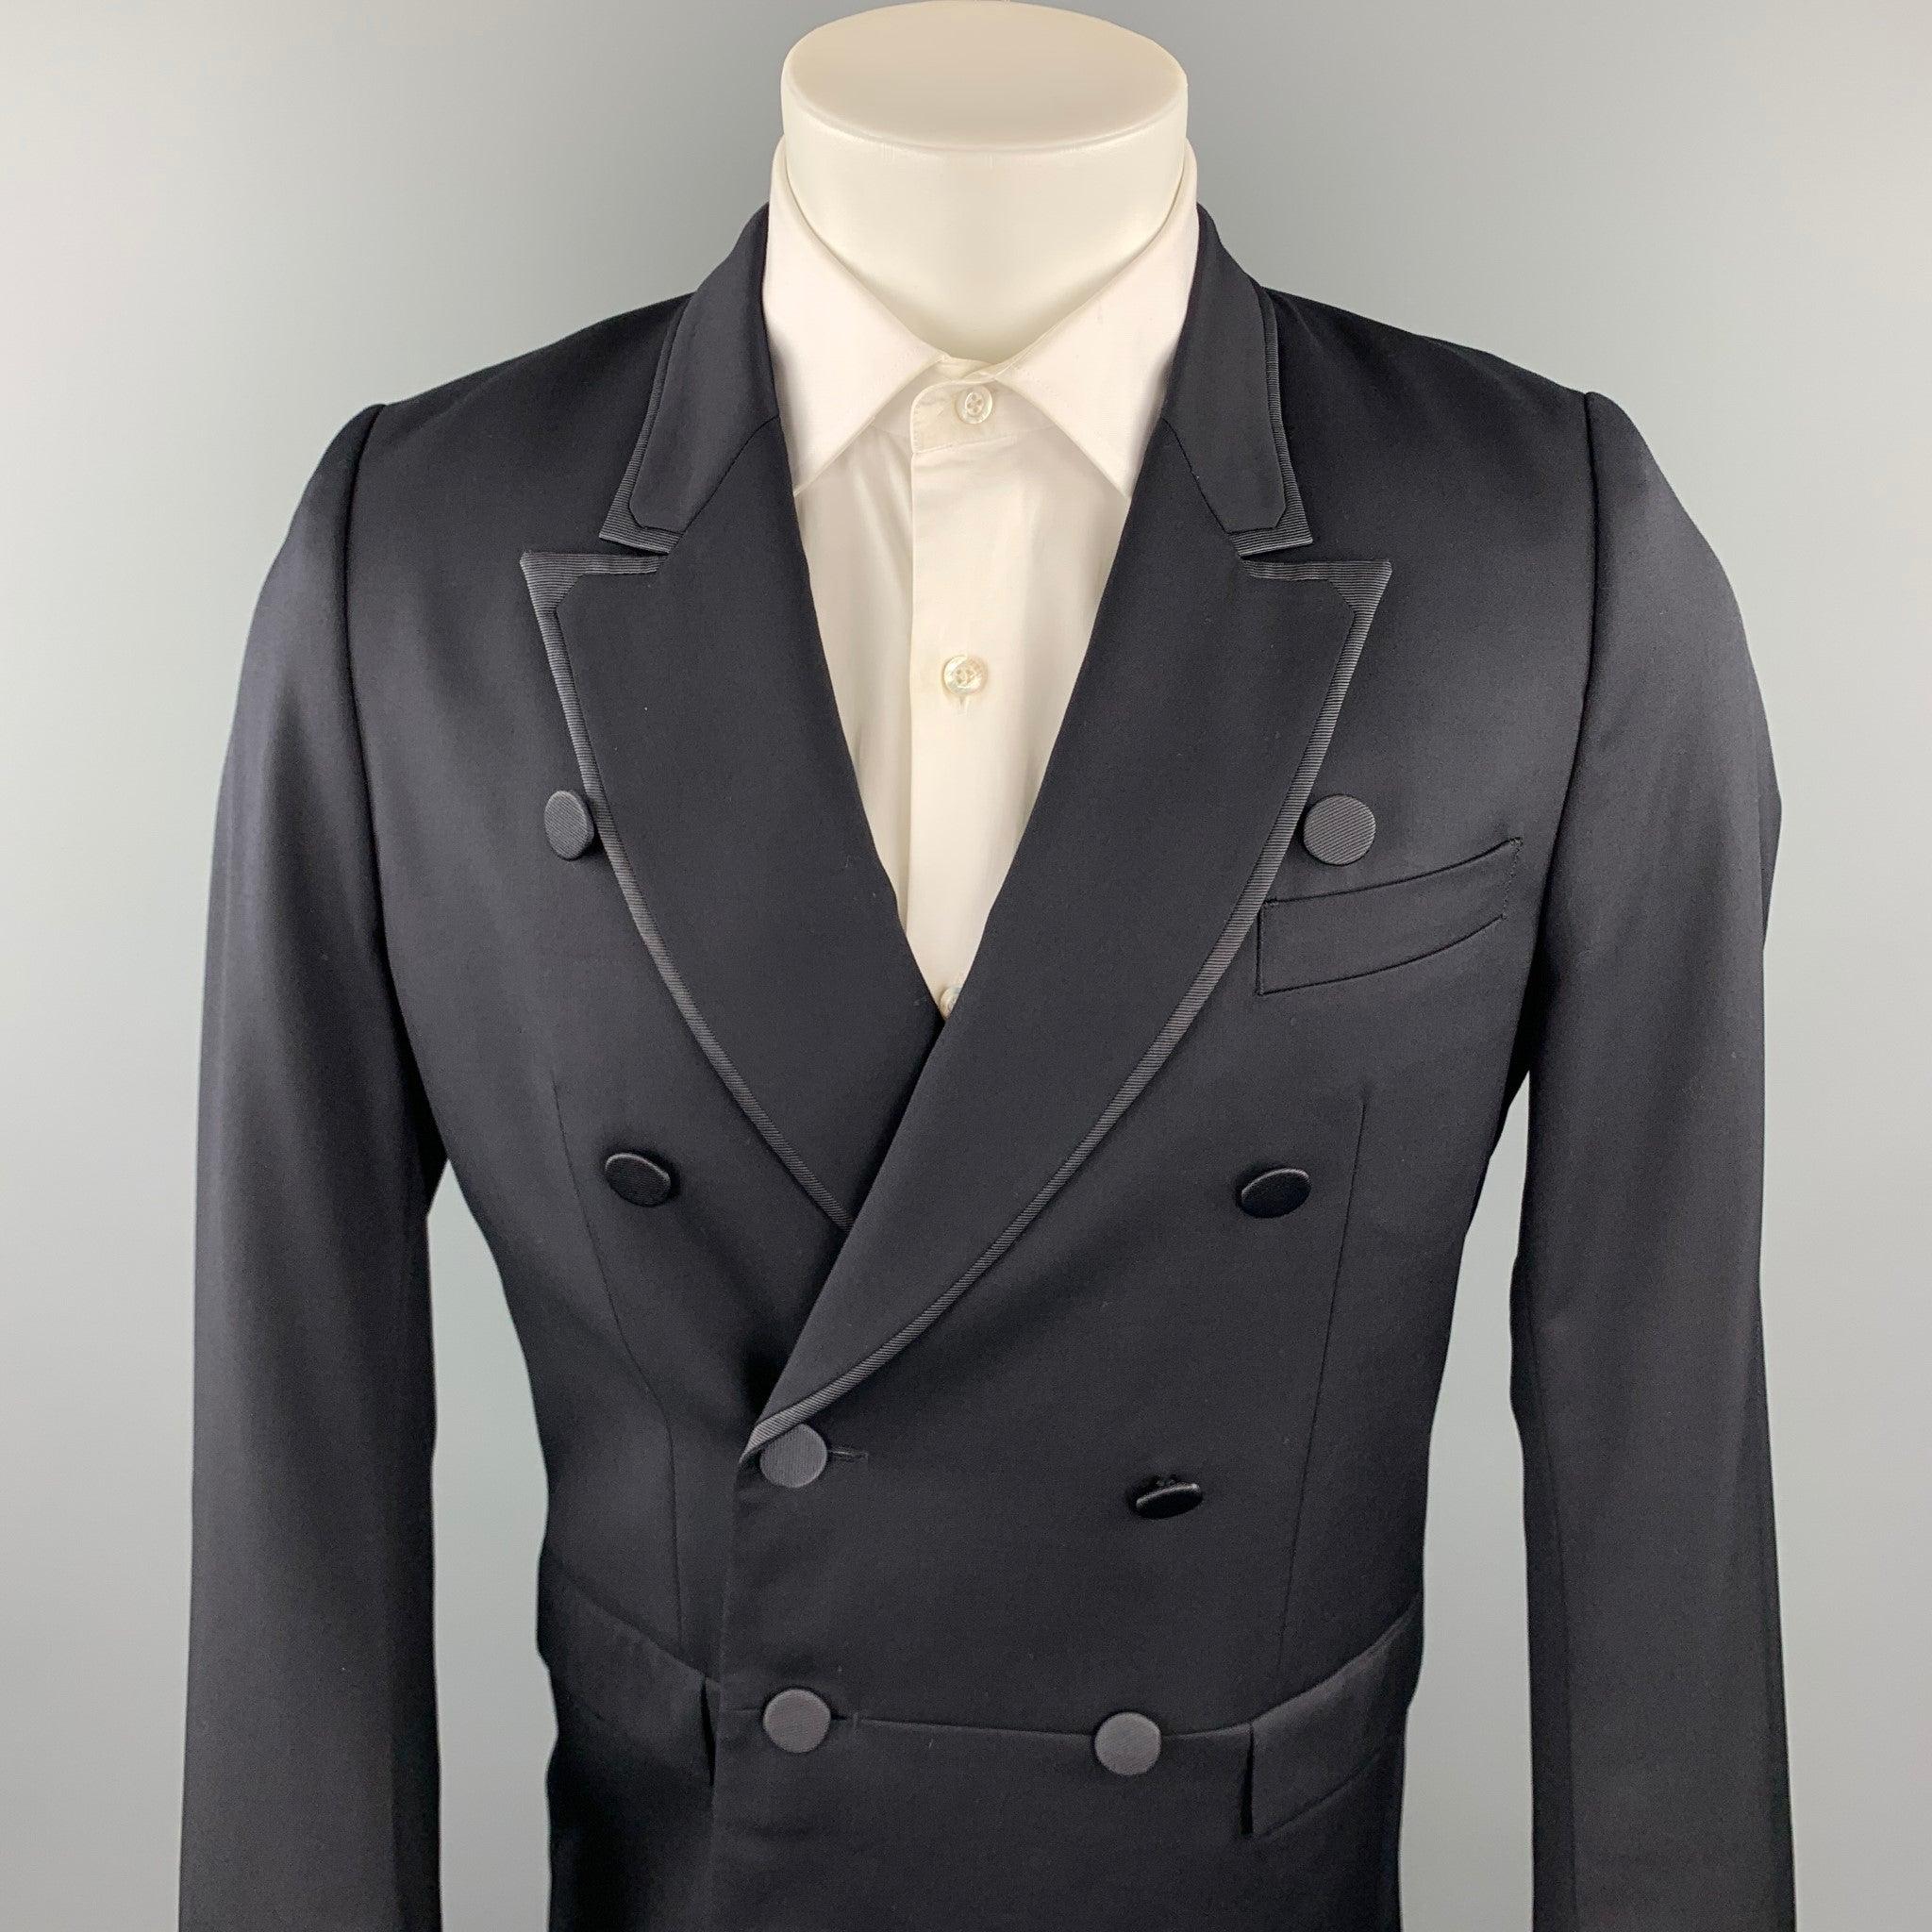 PAUL SMITH tuxedo sport coat comes in a black wool / cashmere featuring a peak lapel, flap pockets, and a double breasted closure. Made in Japan.Excellent
Pre-Owned Condition. 

Marked:   38
 

Measurements: 
 
Shoulder: 16.5 inches 
Chest: 38